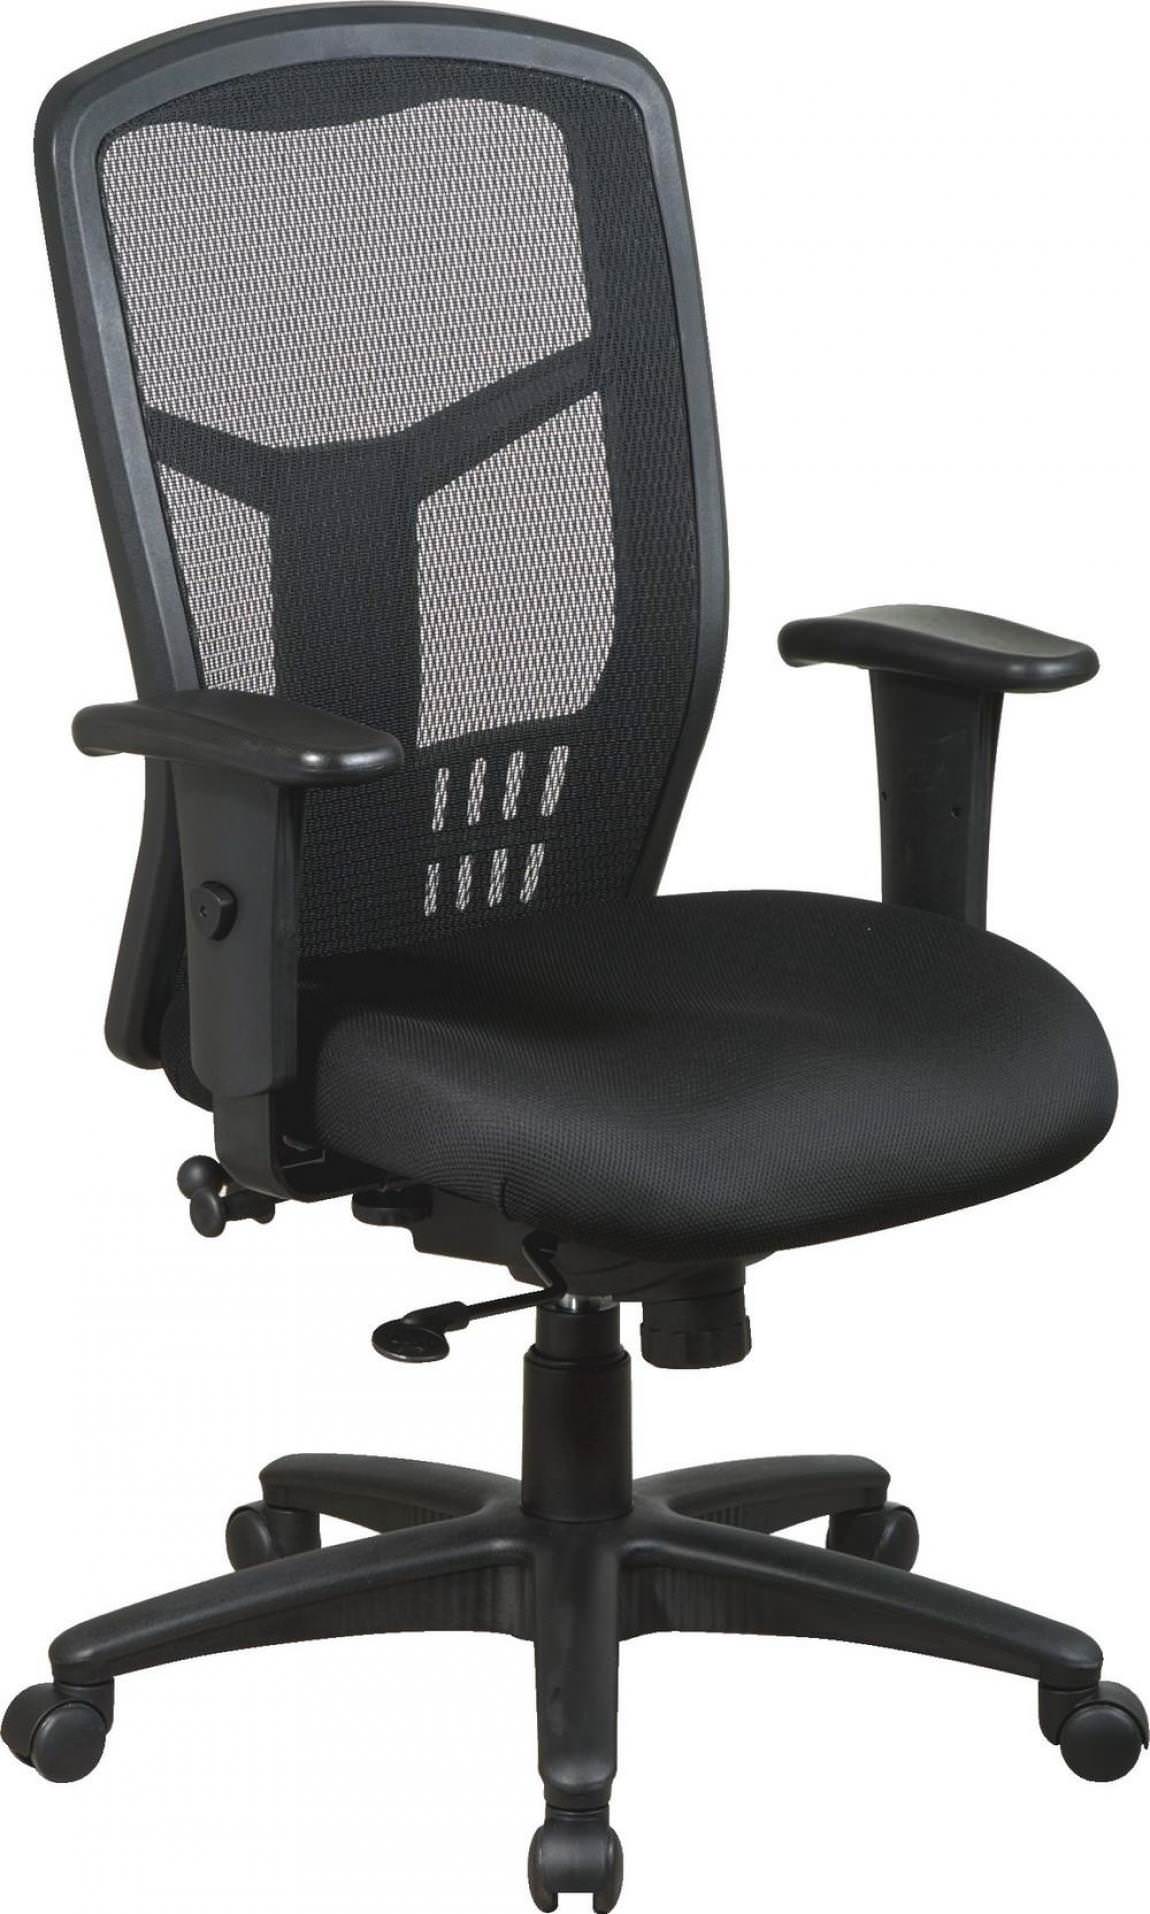 Black Mesh Adjustable Rolling Office Chair - ES-3957 : Express Office